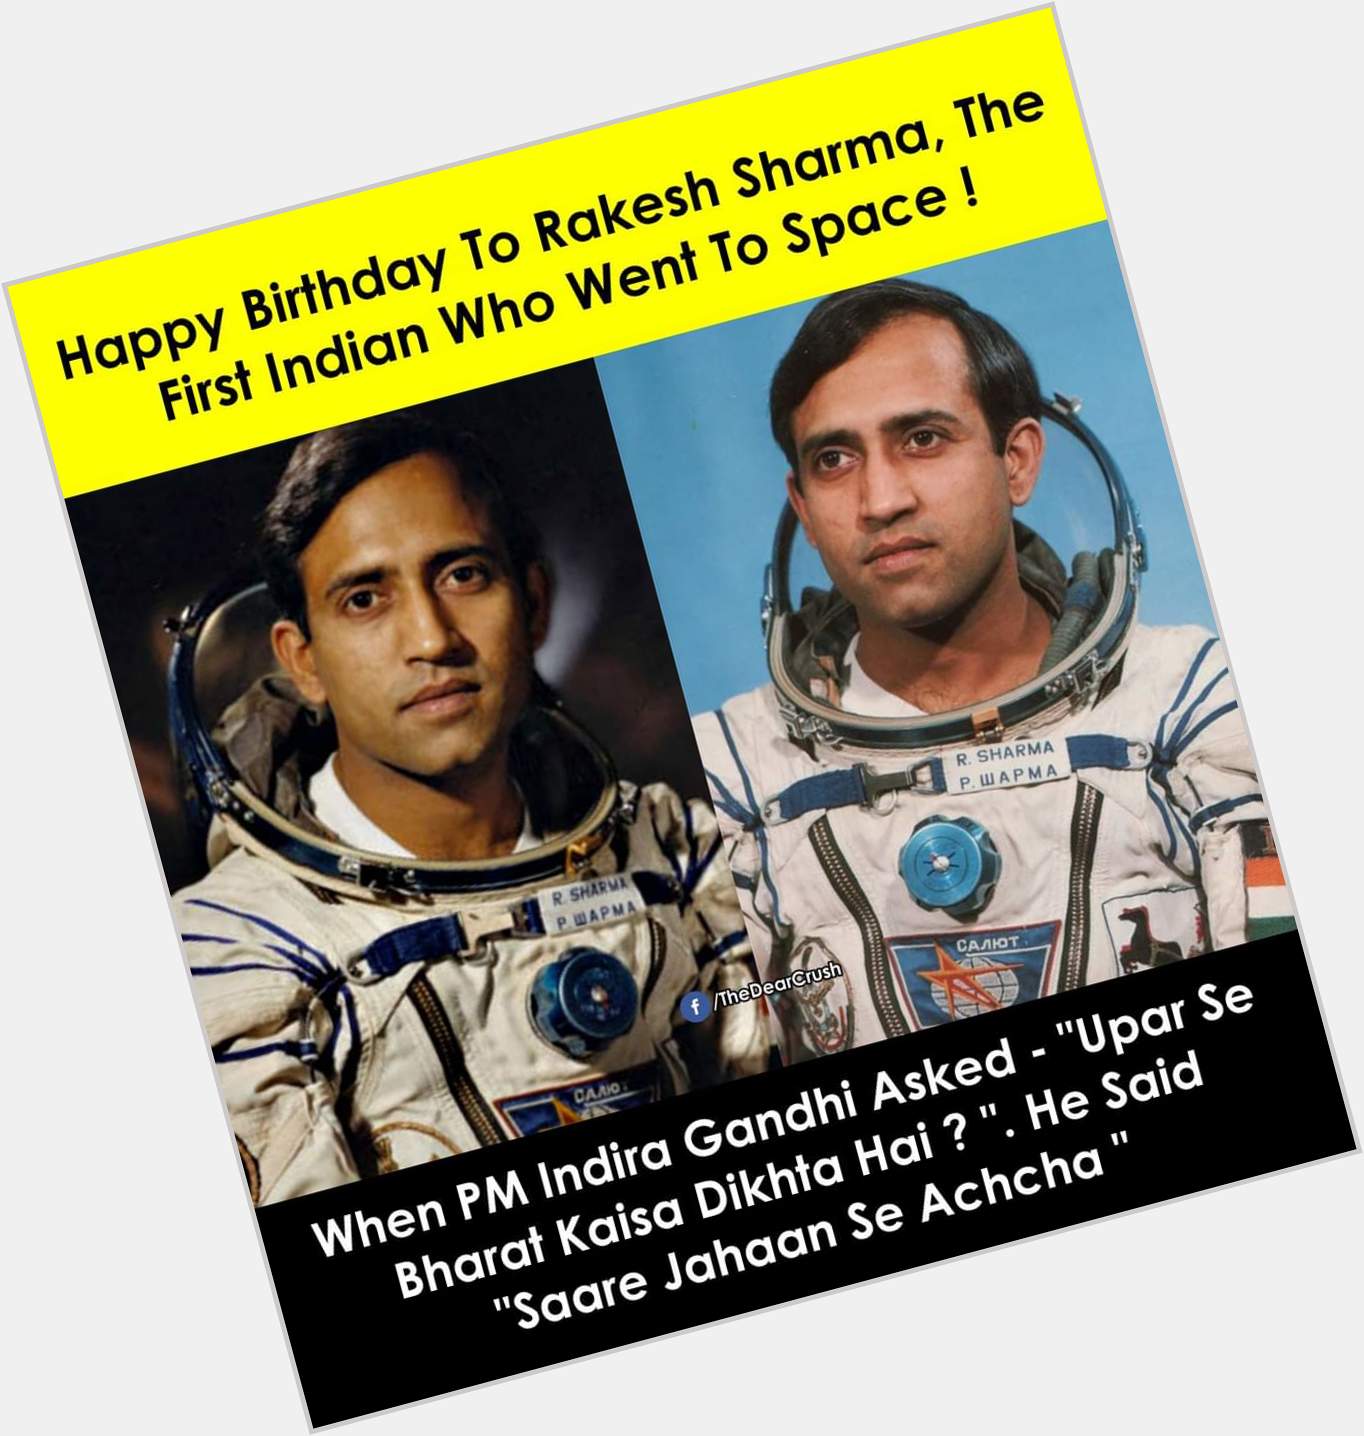 Happy Birthday To Rakesh Sharma, The First Indian Who Went To Space! - 